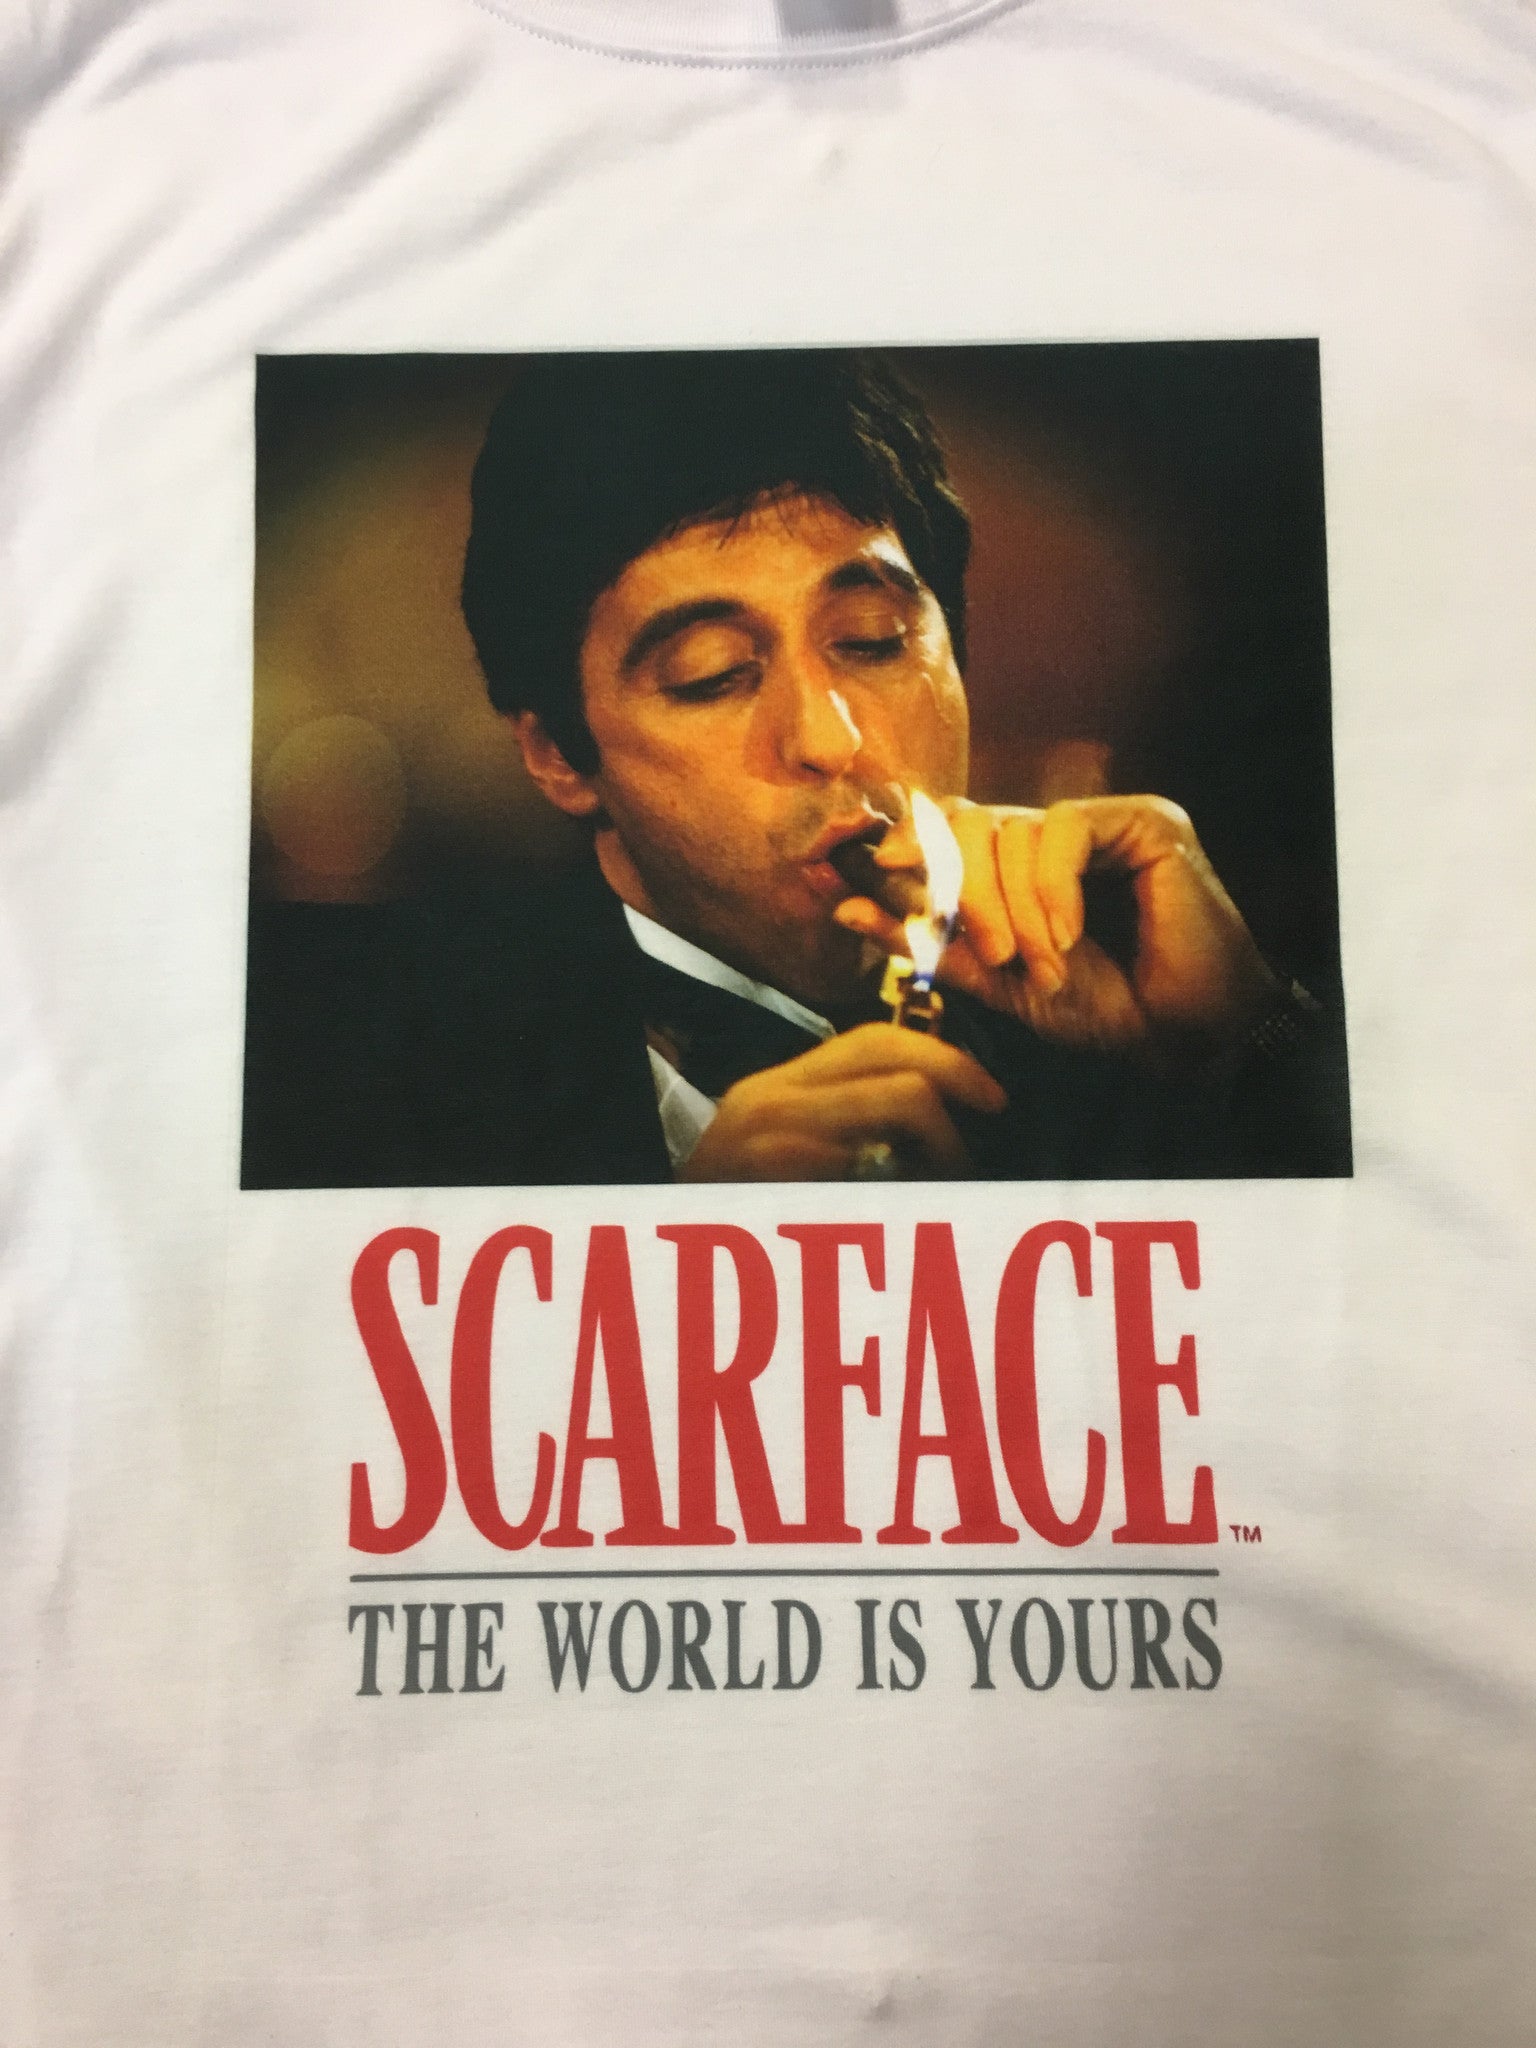 Scarface "The World is Yours" T-Shirt